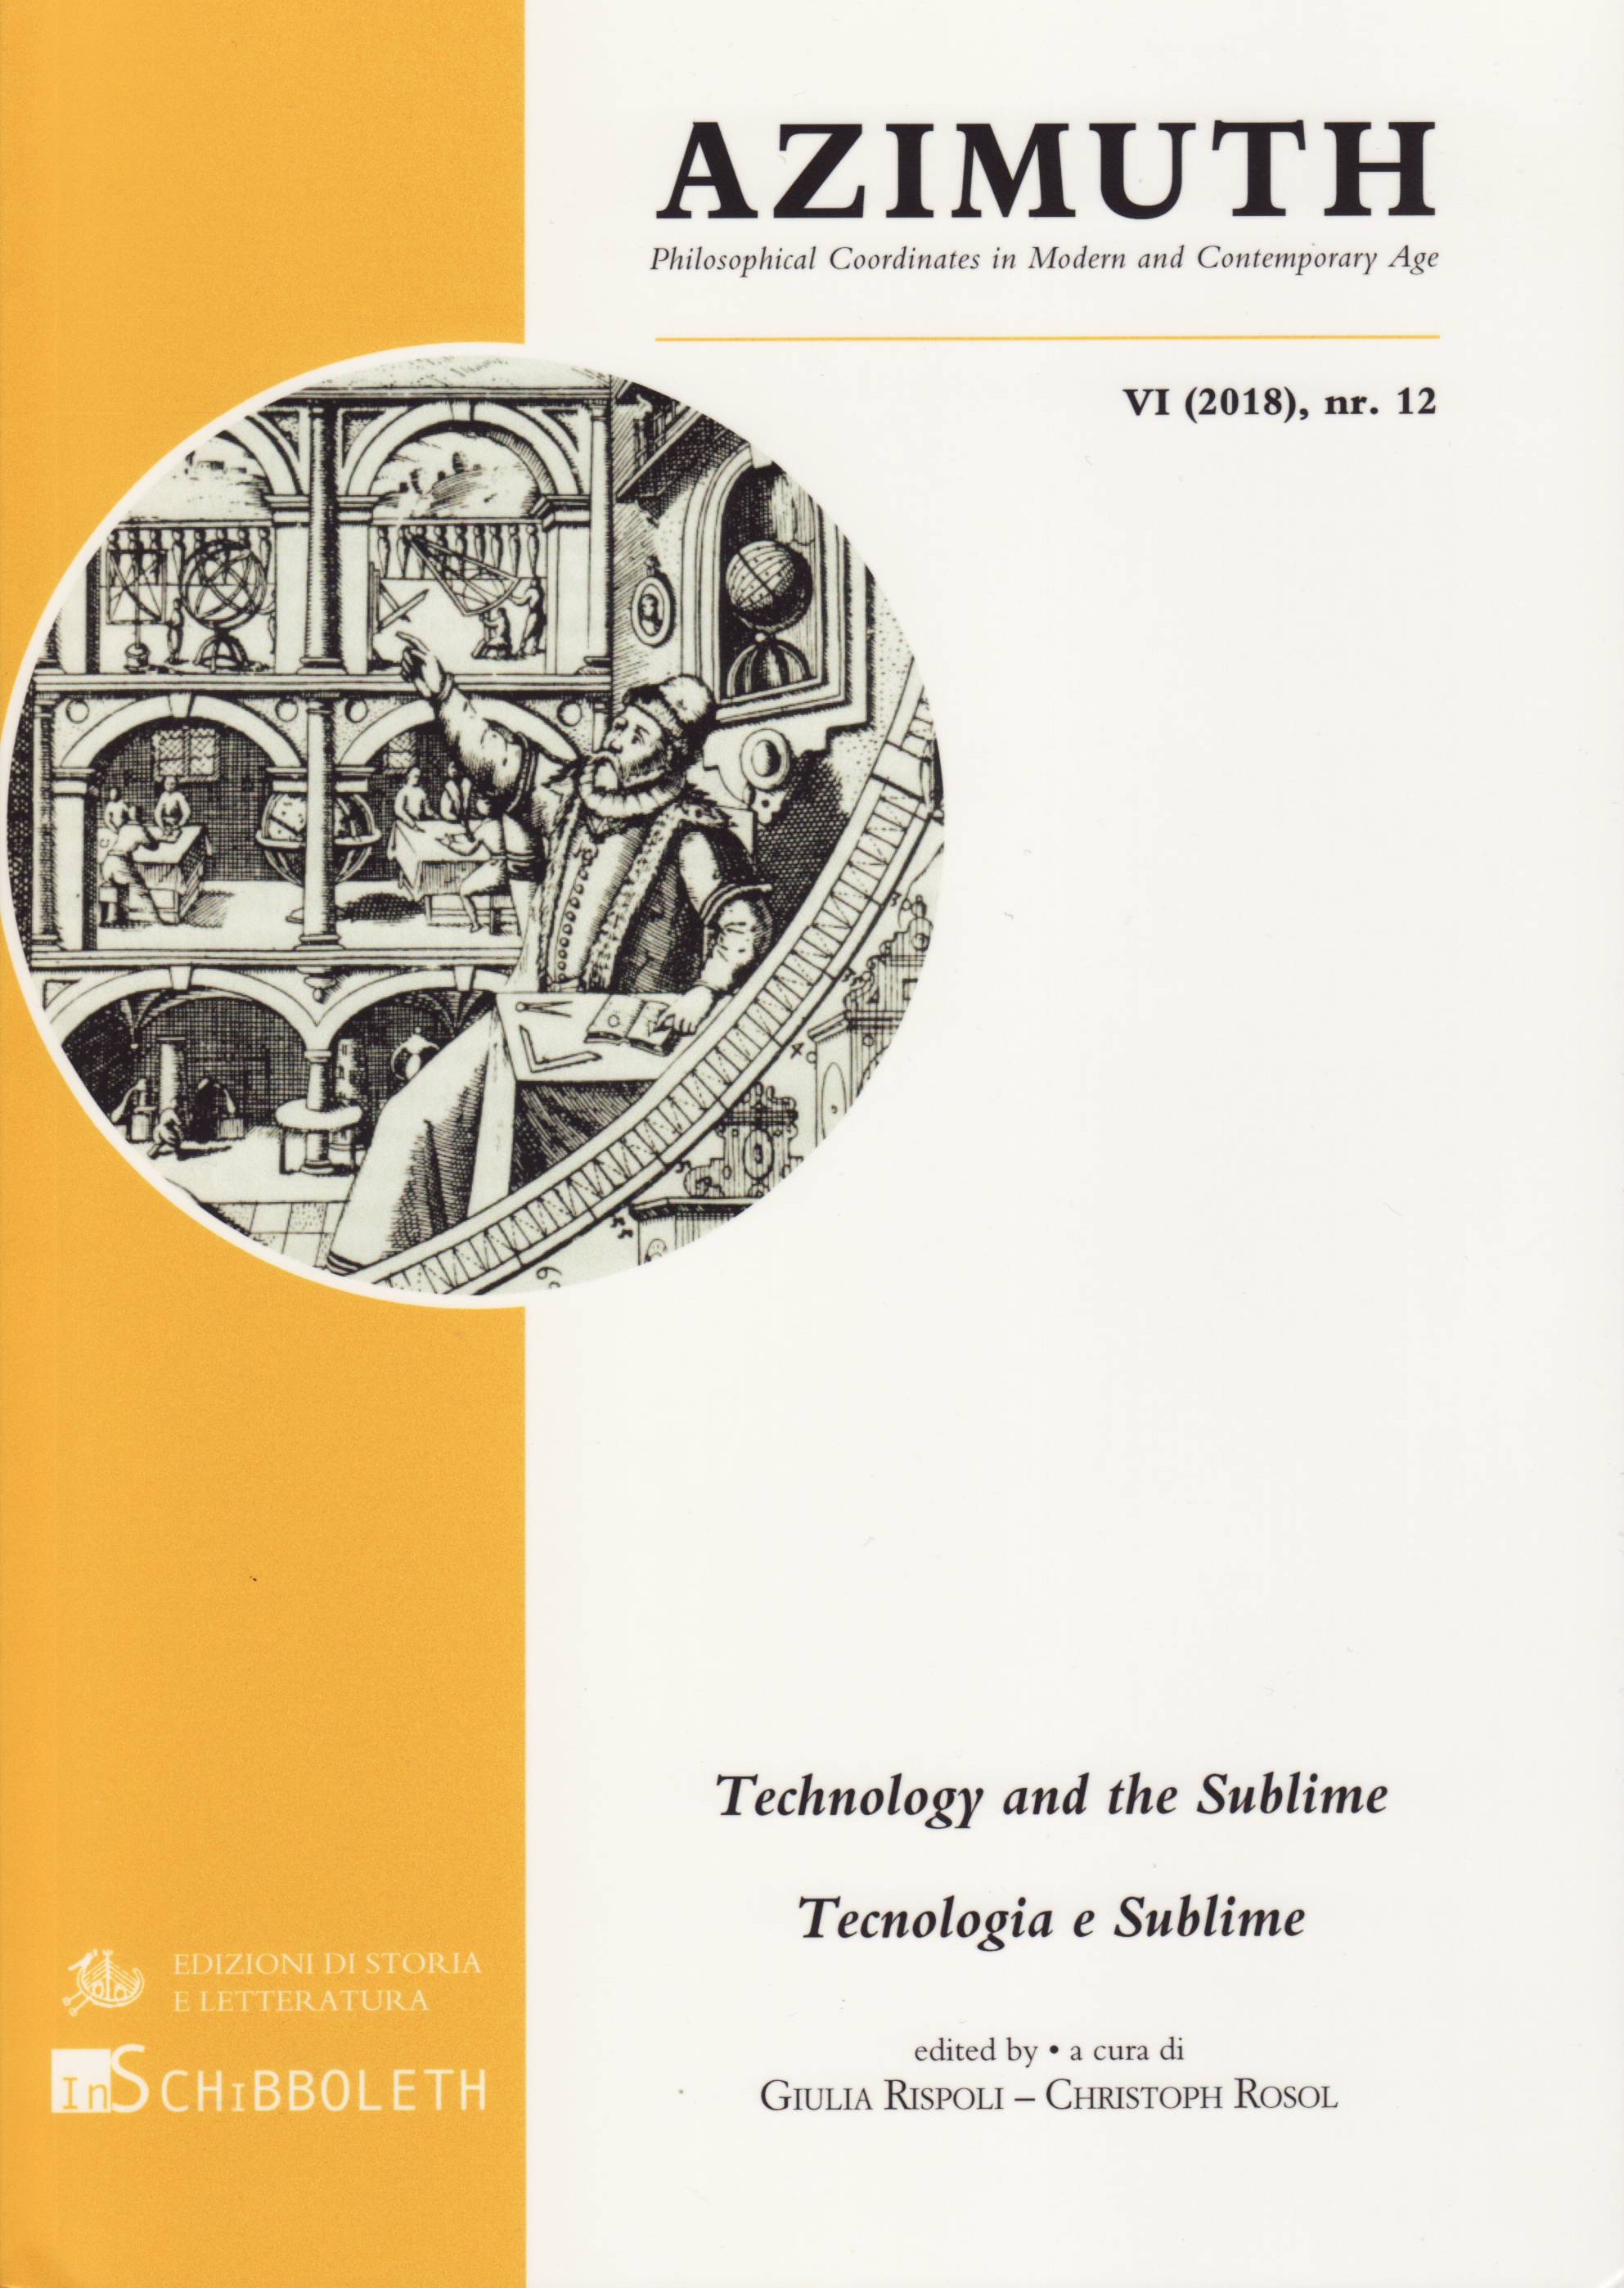 book cover: Rispoli/ Rosol: Technology and the Sublime (2018)